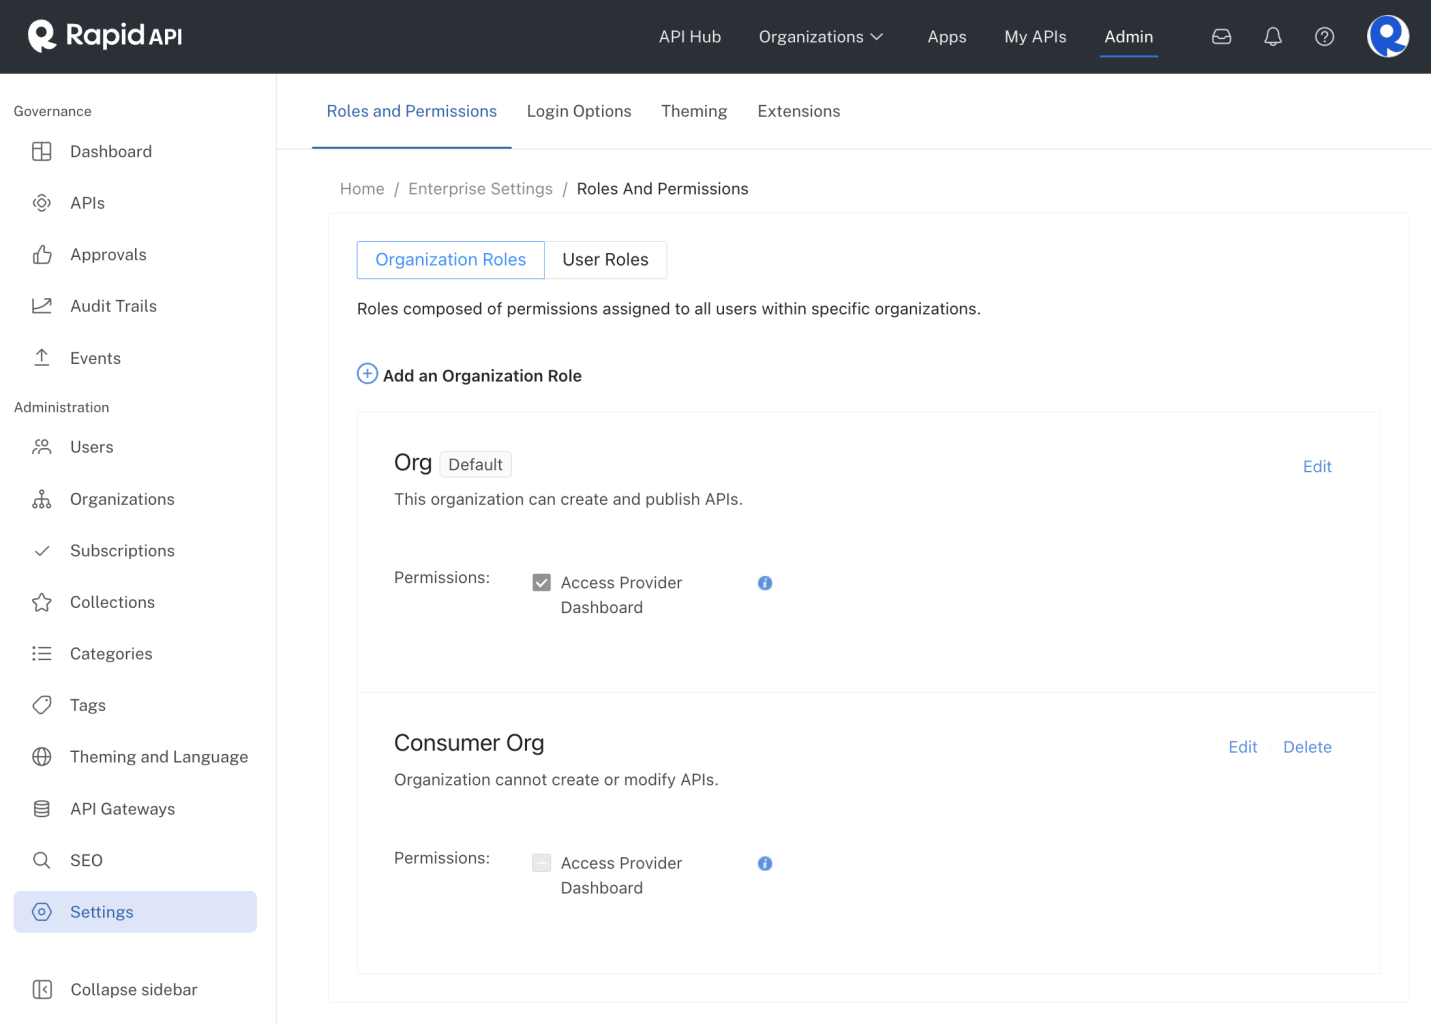 Roles and permissions in the Admin Panel.